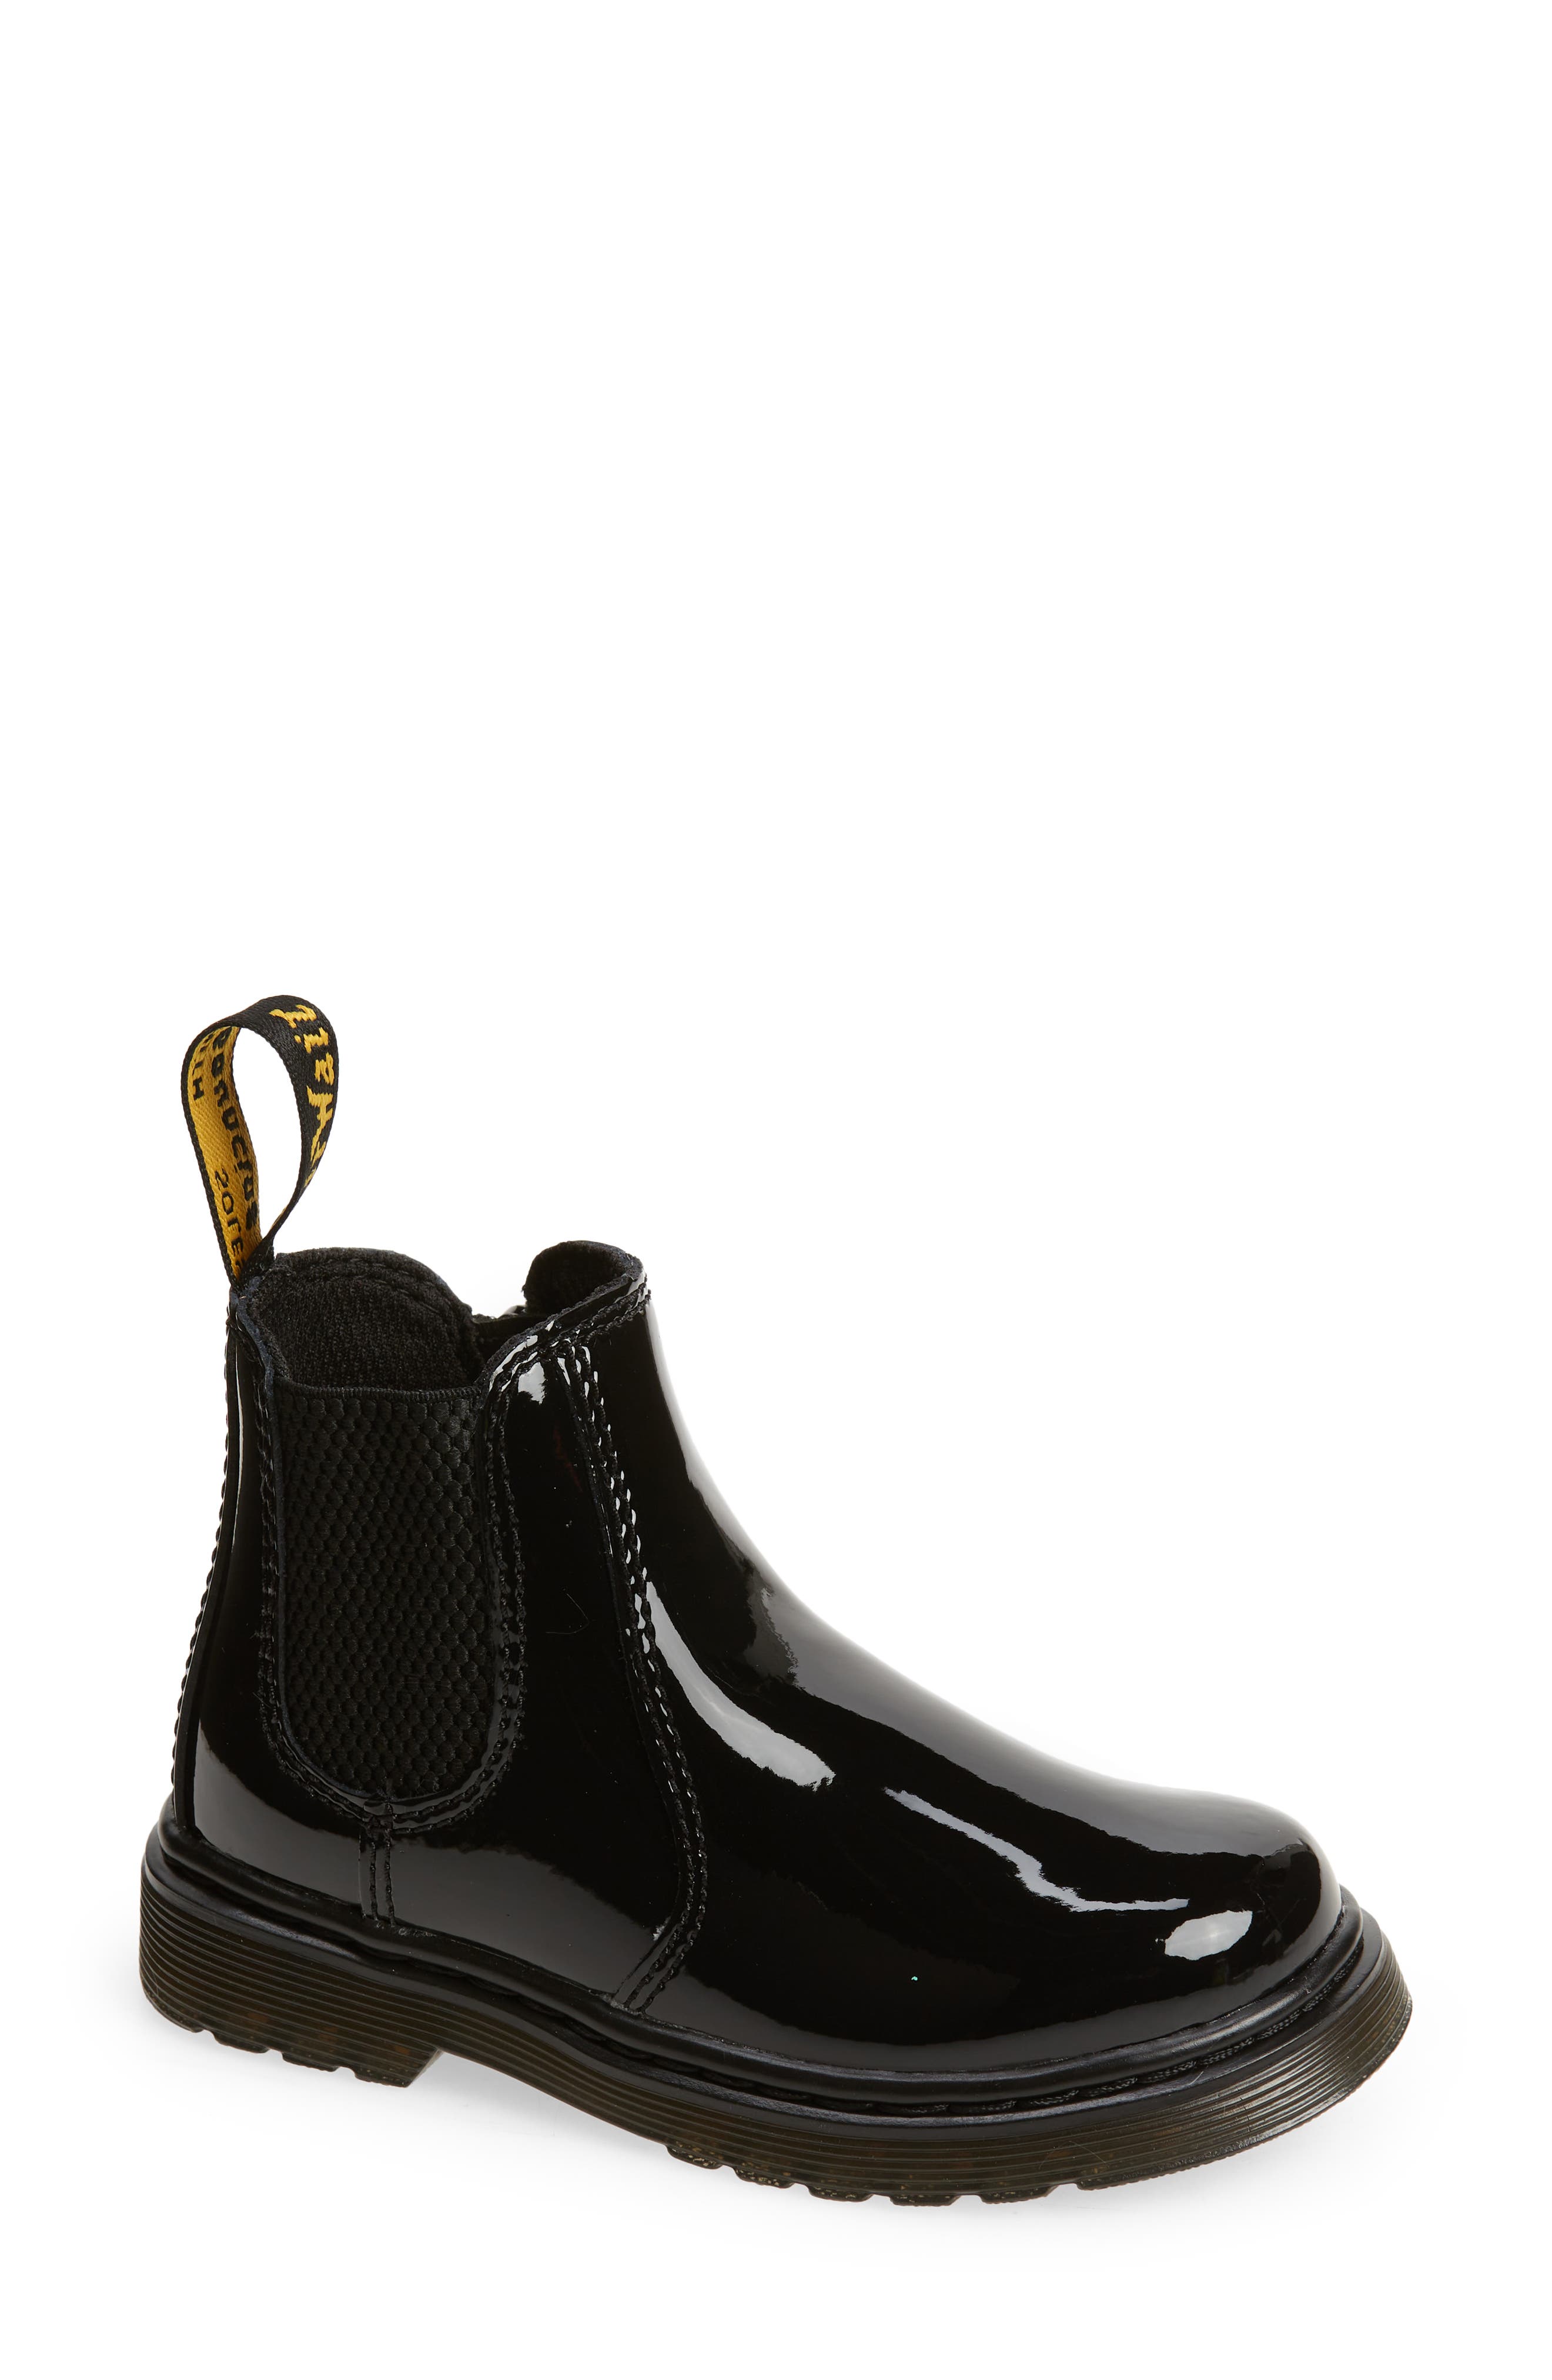 Dr. Martens 2976 Patent Leather Cheslea Boot in Black at Nordstrom, Size 7Us